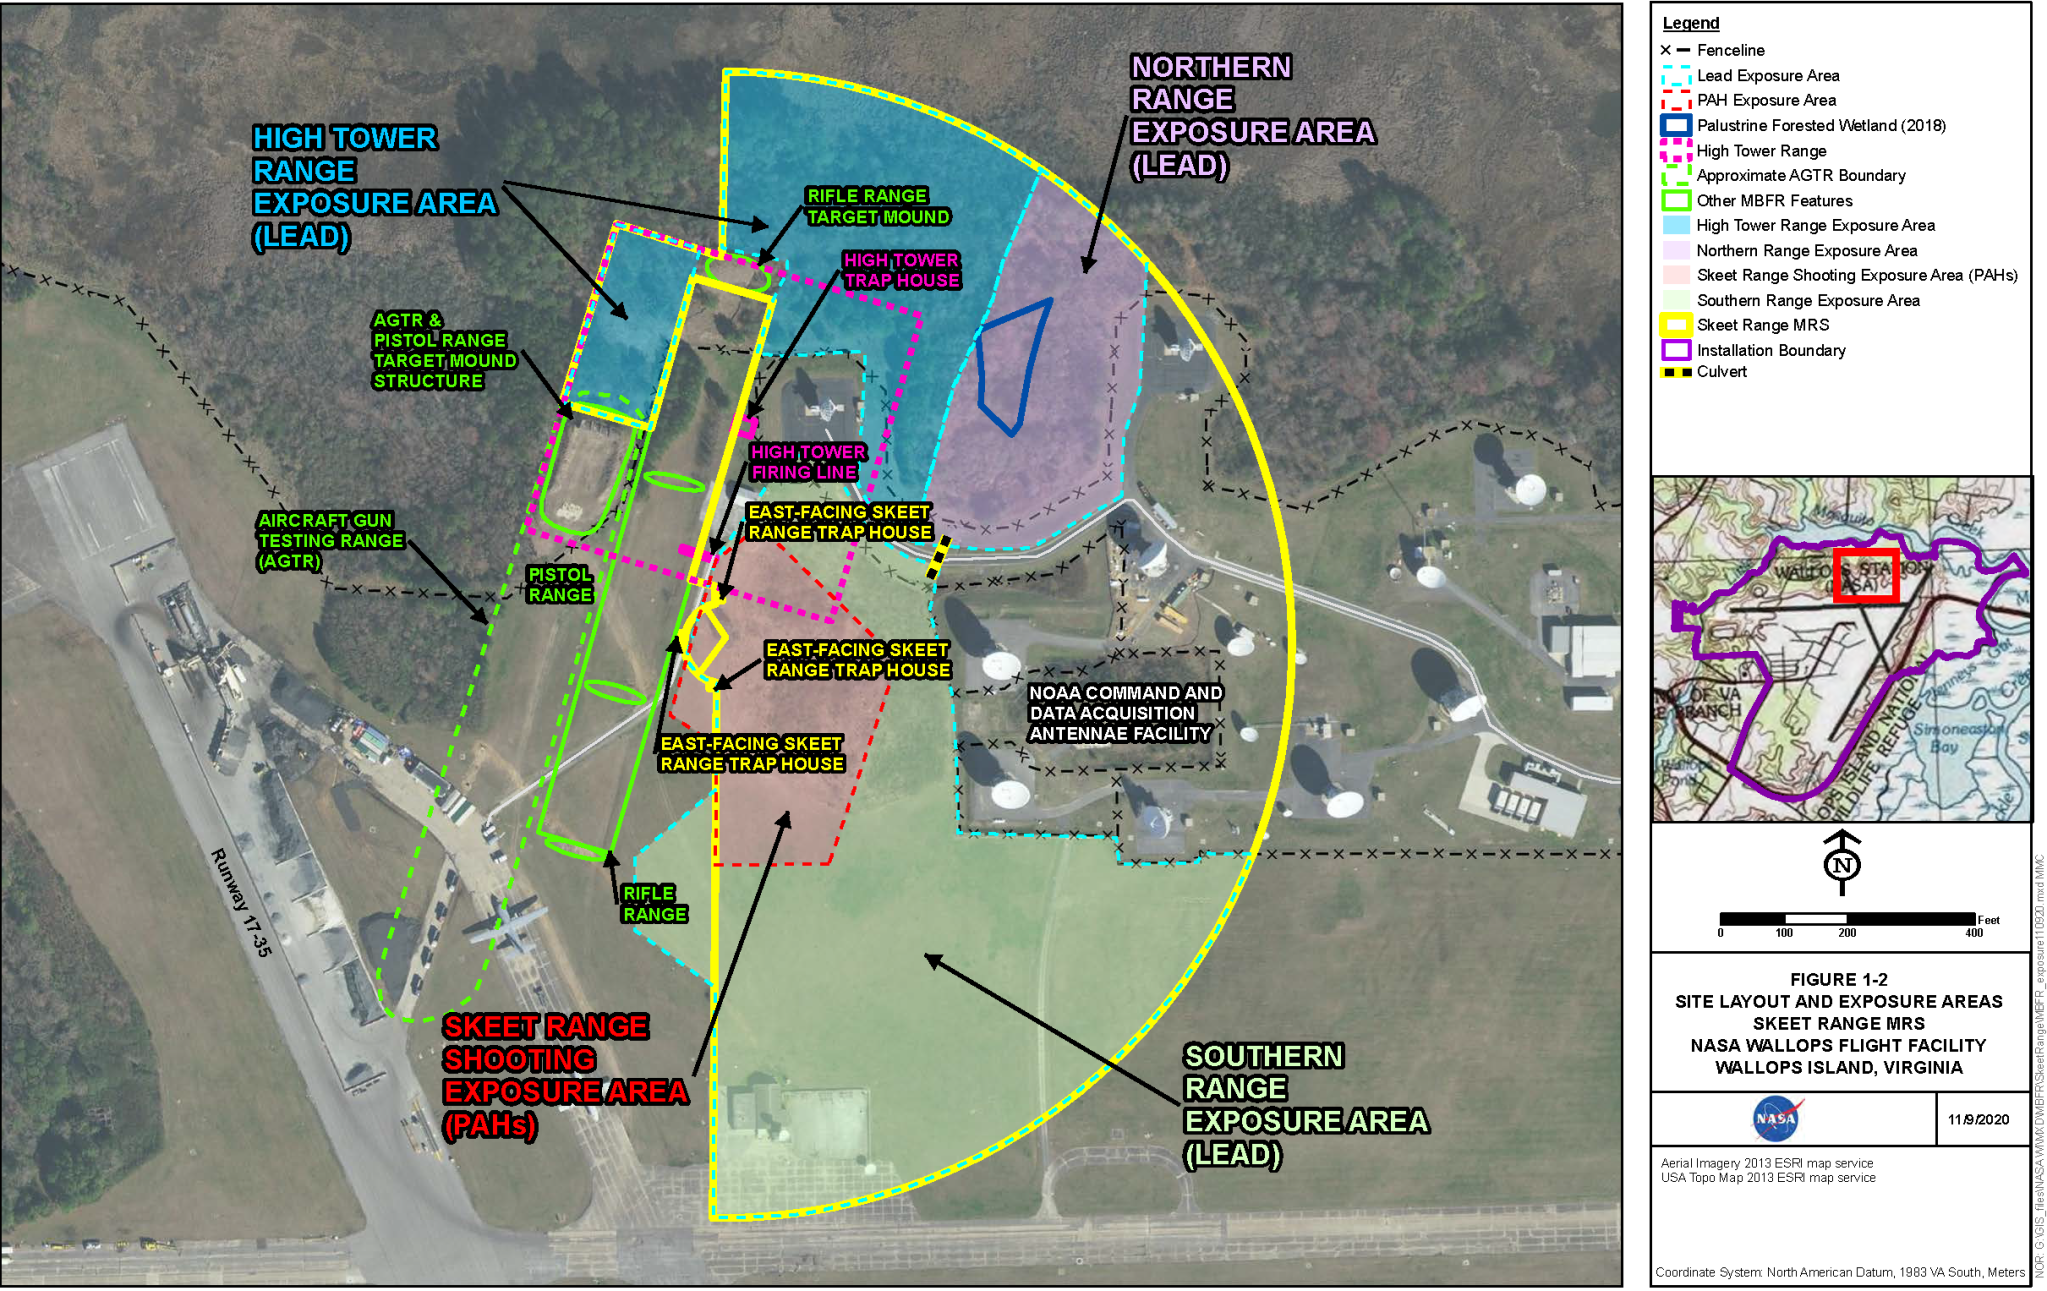 Map showing the semi-circular region of the Skeet Range, detailing the old Skeet Range firing range features with shaded areas where testing has shown elevated concentrations of lead or polycyclic aromatic hydrocarbons (PAHs).